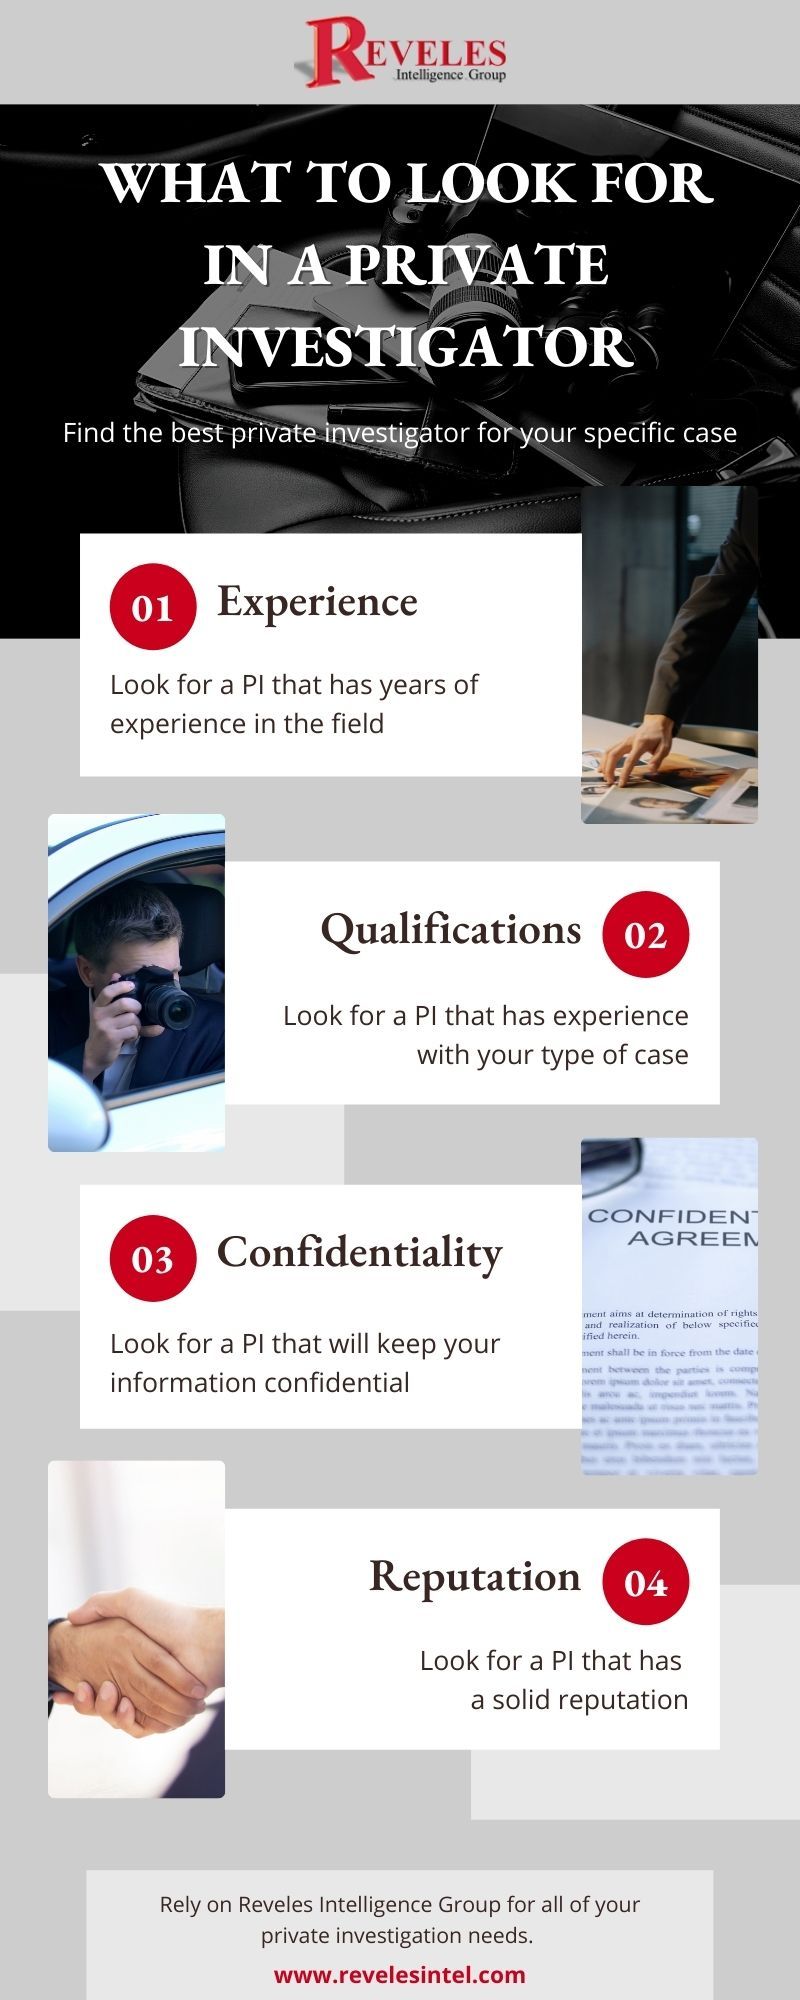 M16263 - Reveles Intelligence Group - What to Look for in a Private Investigator - Infographic.jpg